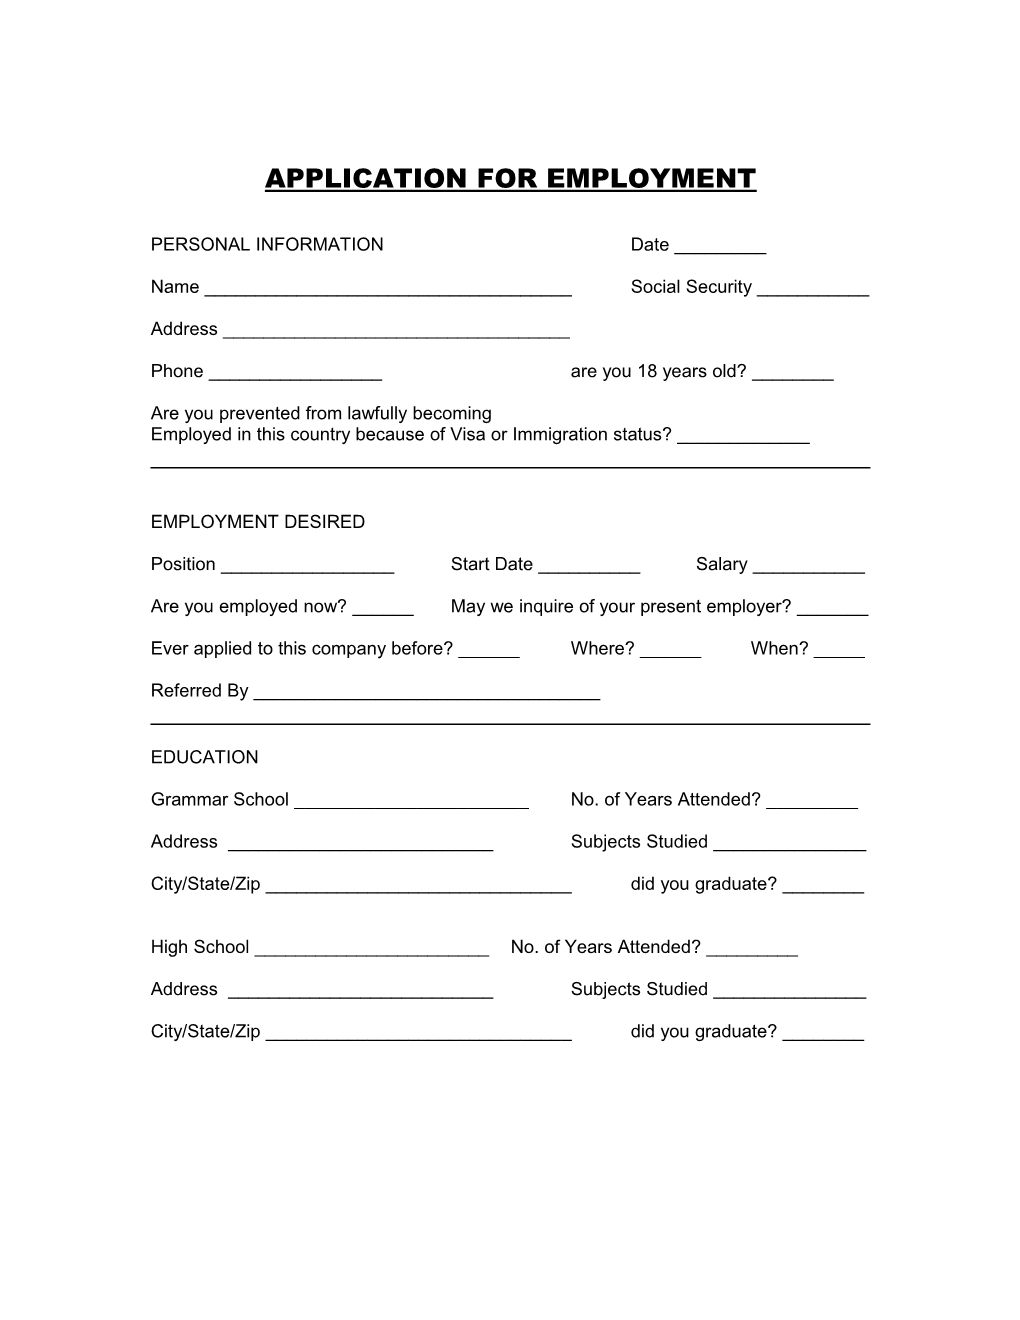 Application for Employment s79